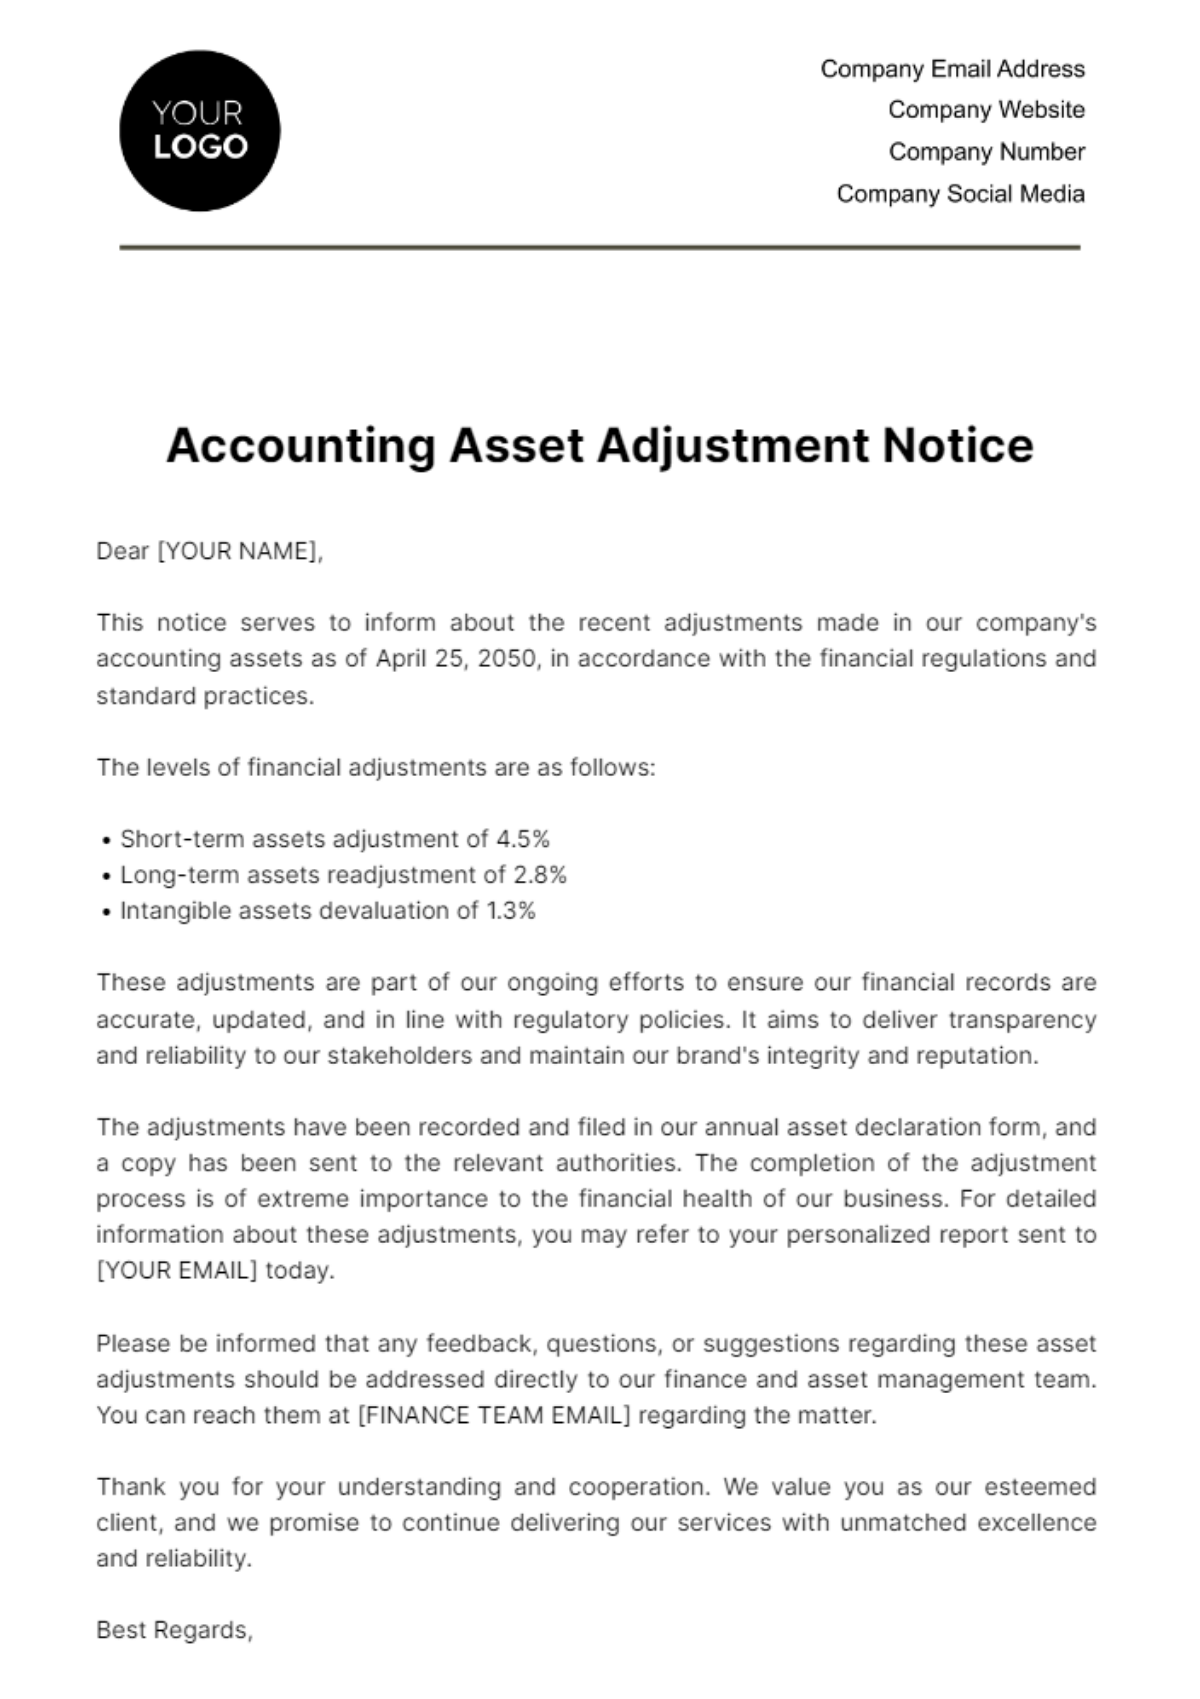 Accounting Asset Adjustment Notice Template